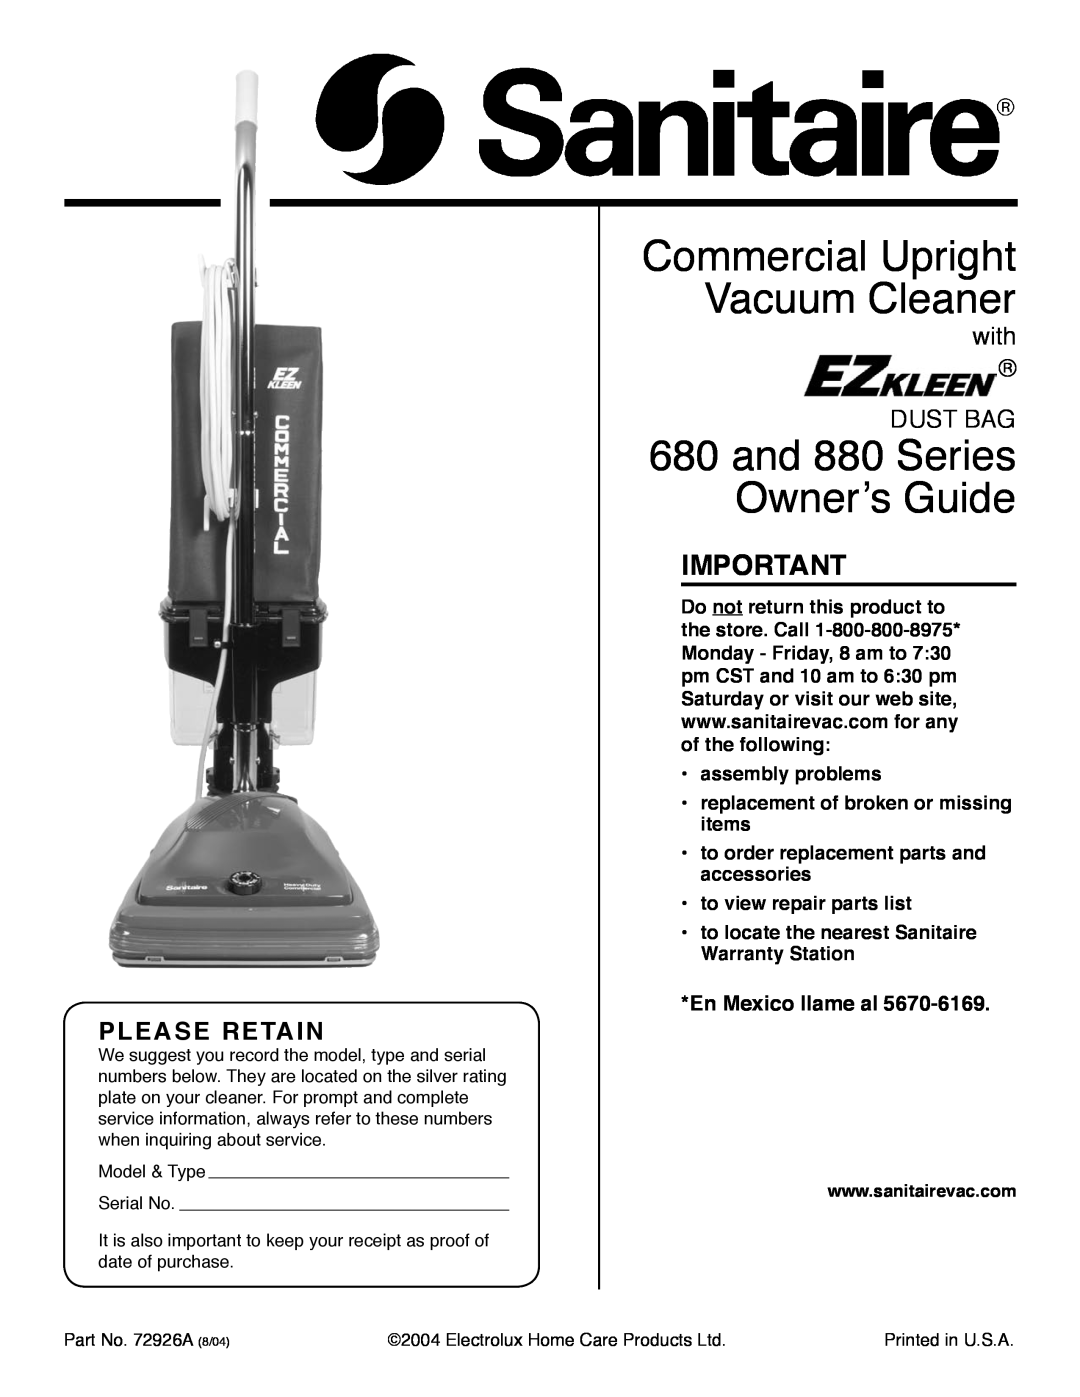 Sanitaire warranty En Mexico llame al, Commercial Upright Vacuum Cleaner, and 880 Series Ownerʼs Guide, Please Retain 